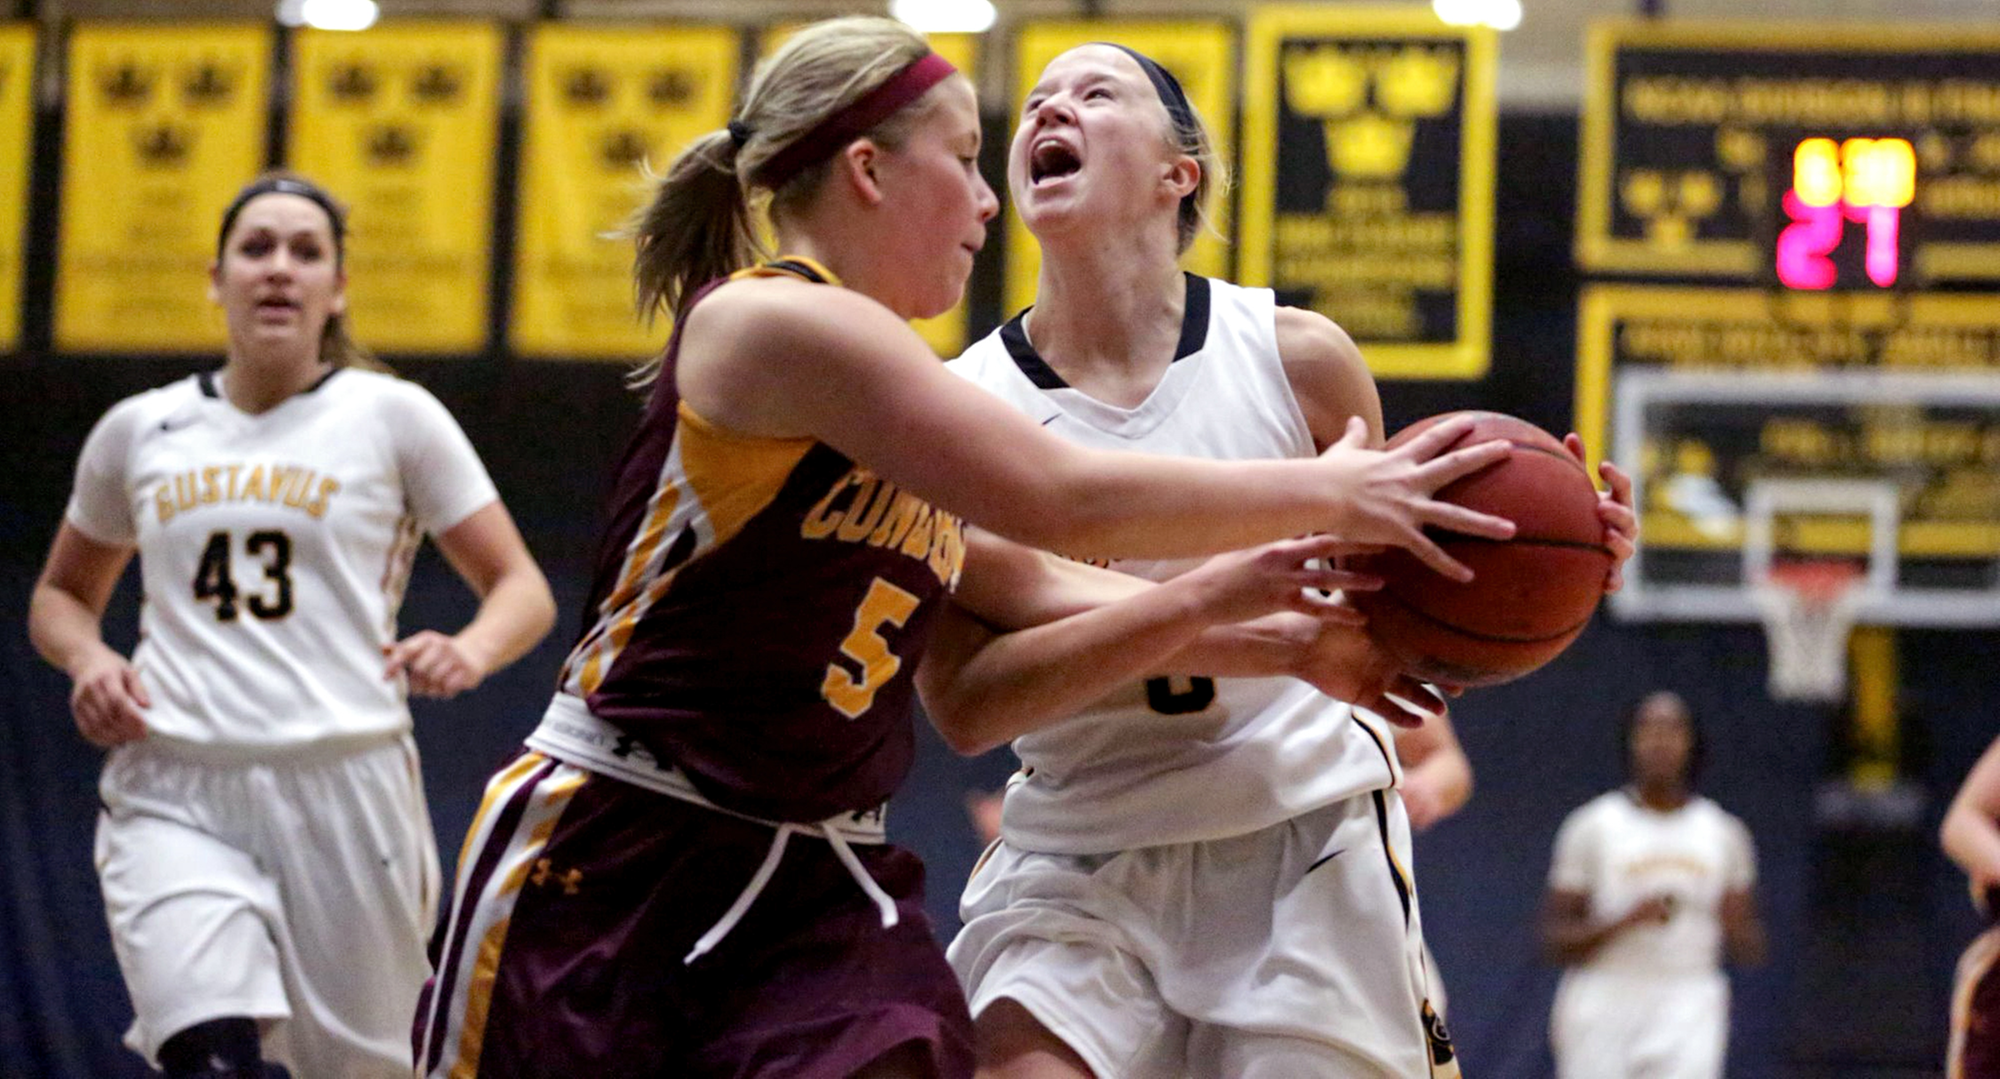 Cobber freshman Lexi Nelson goes for the steal in Concordia's conference opener at Gustavus. (Photo courtesy of Roisen Granlund and the Gustavus sports information office)